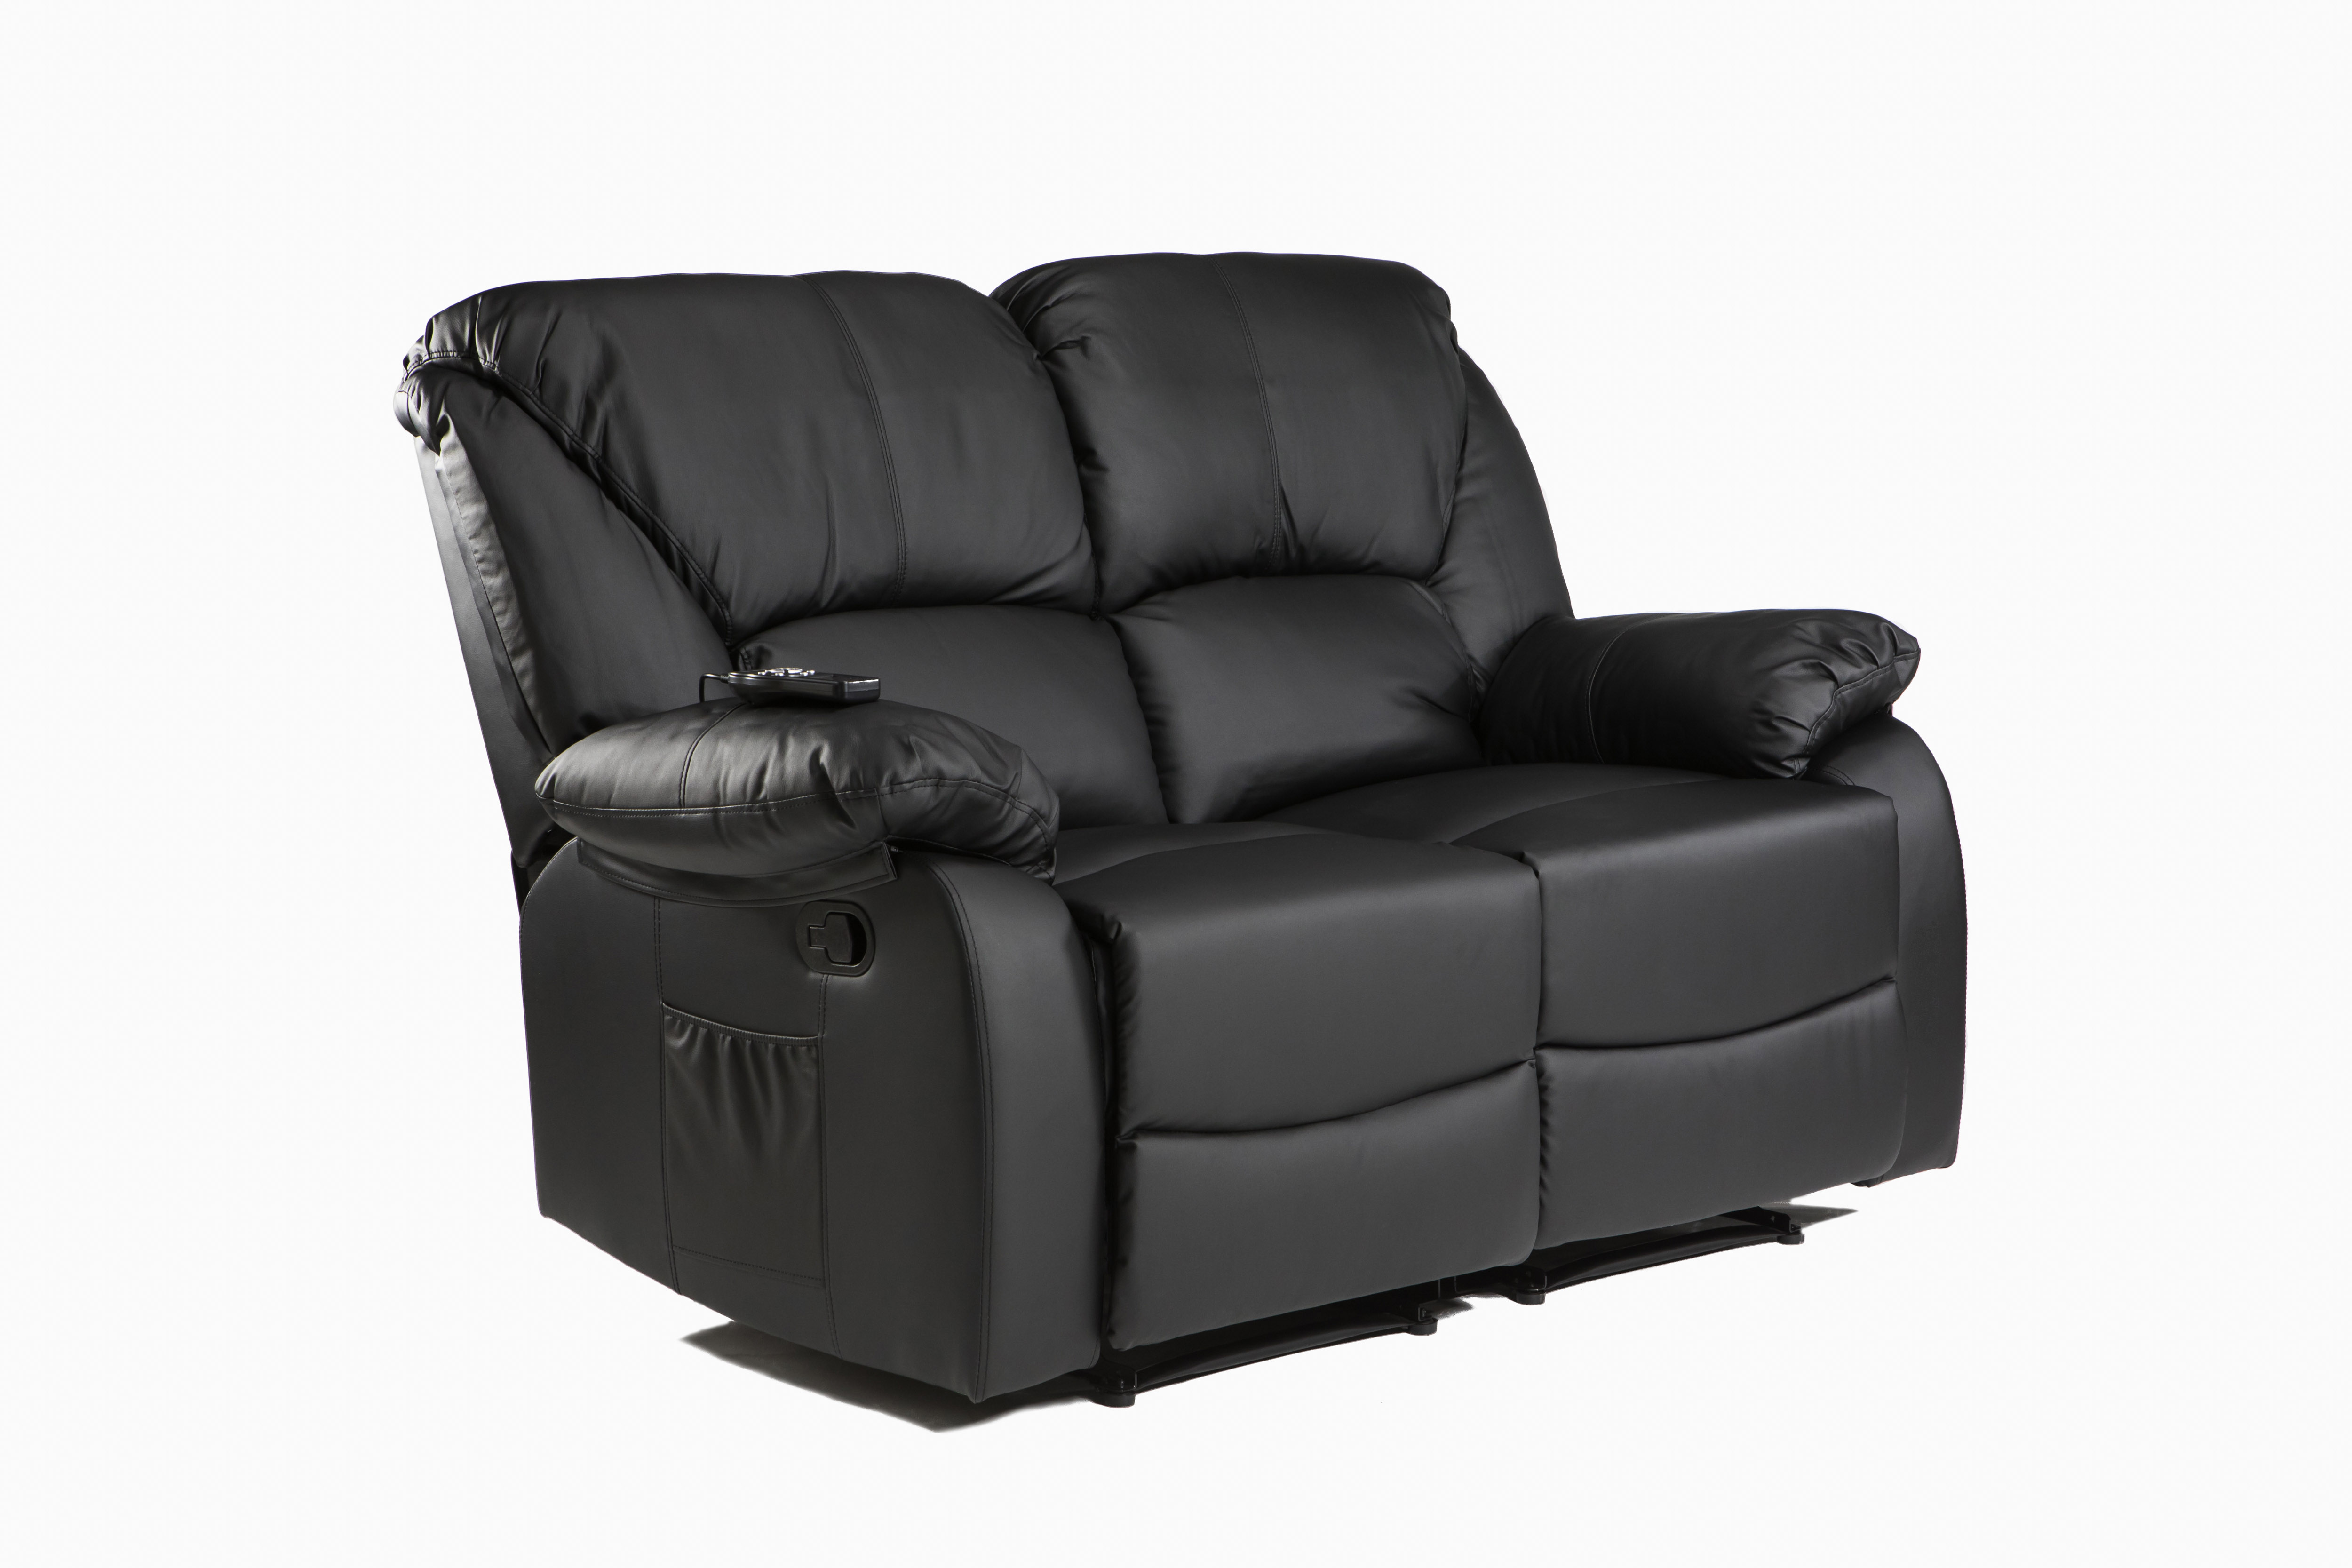 Armchair With Vibrating Wave Massage